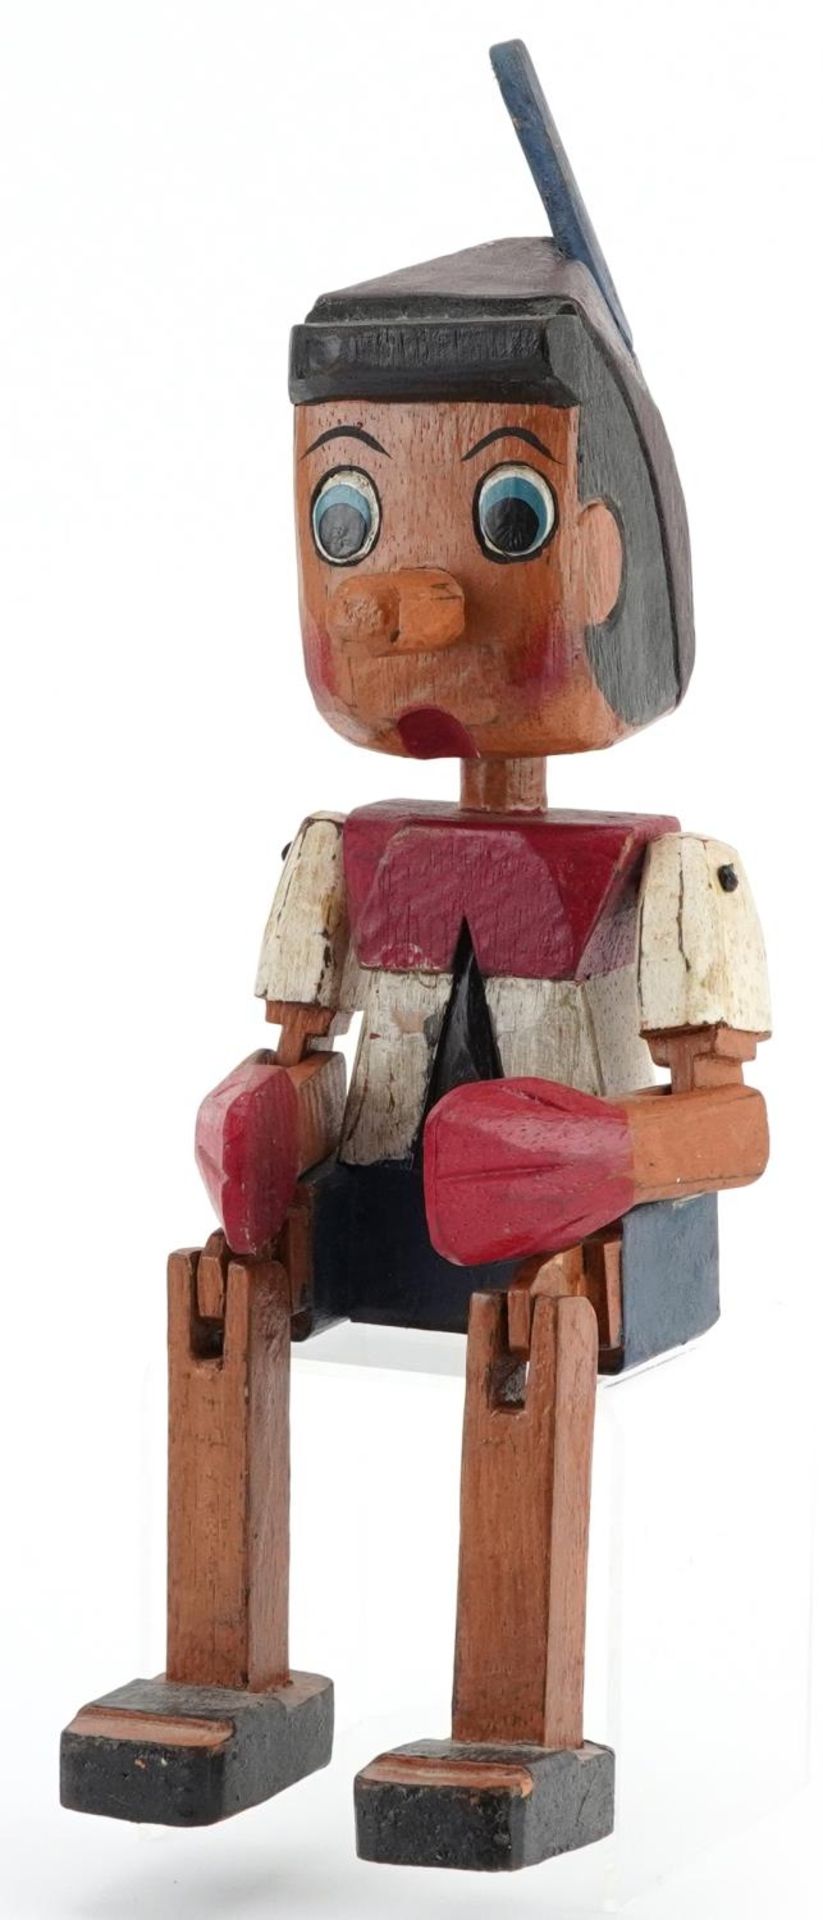 Hand painted carved wood figure of Pinocchio with jointed arms and legs, 35cm high